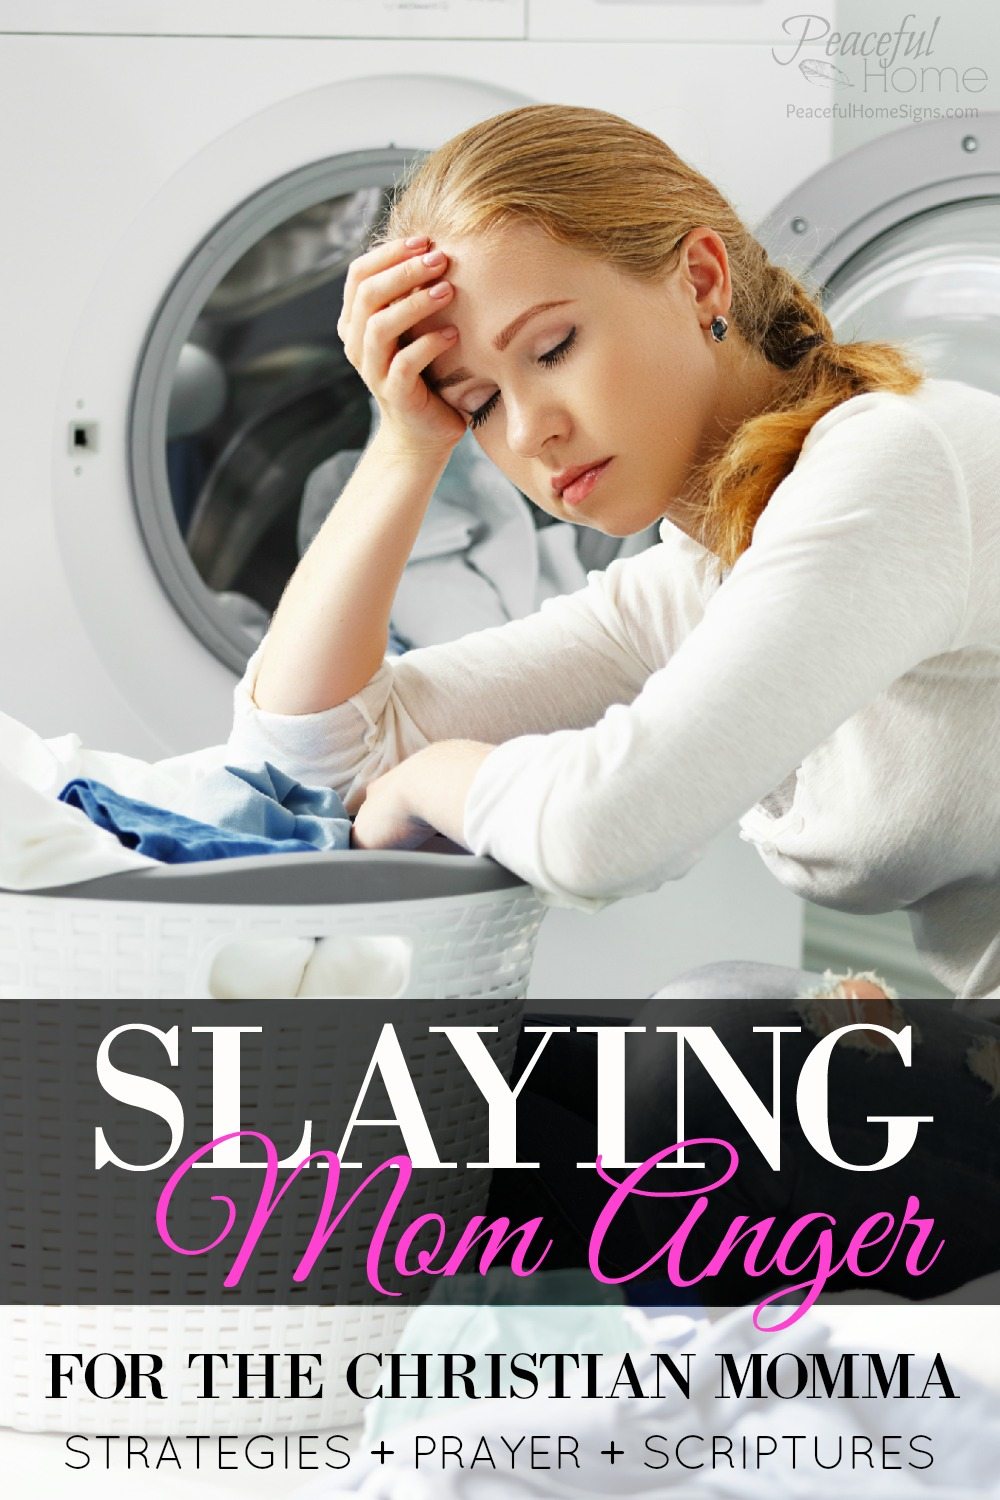 Slaying Mom Anger for the Christian Momma | mom anger | defeat mom anger | slaying mom anger | Christian mom anger | overcoming mom anger | rage at my kids | frustrated mom, stressed stay at home mom | strategies for mom anger | Prayer for mom anger | Scriptures for mom anger